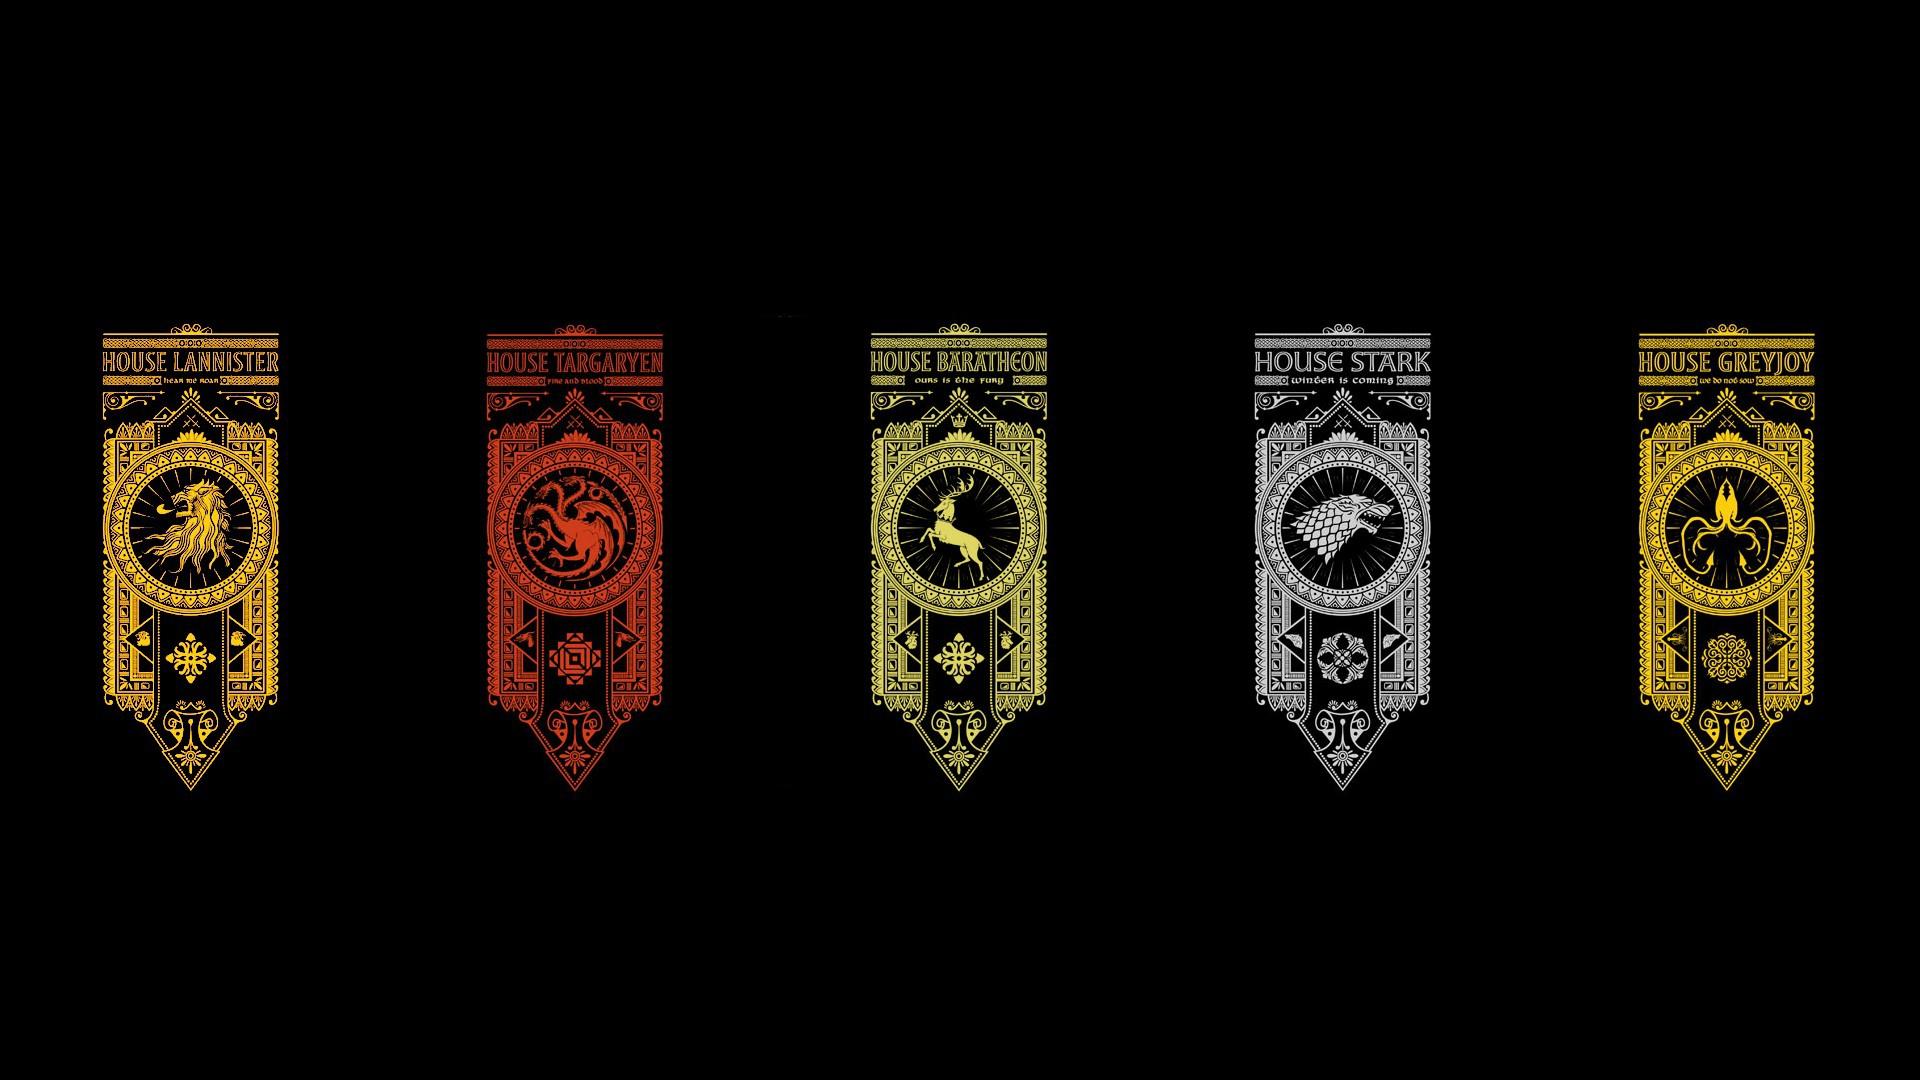 Game Of Thrones House Symbols Wallpapers